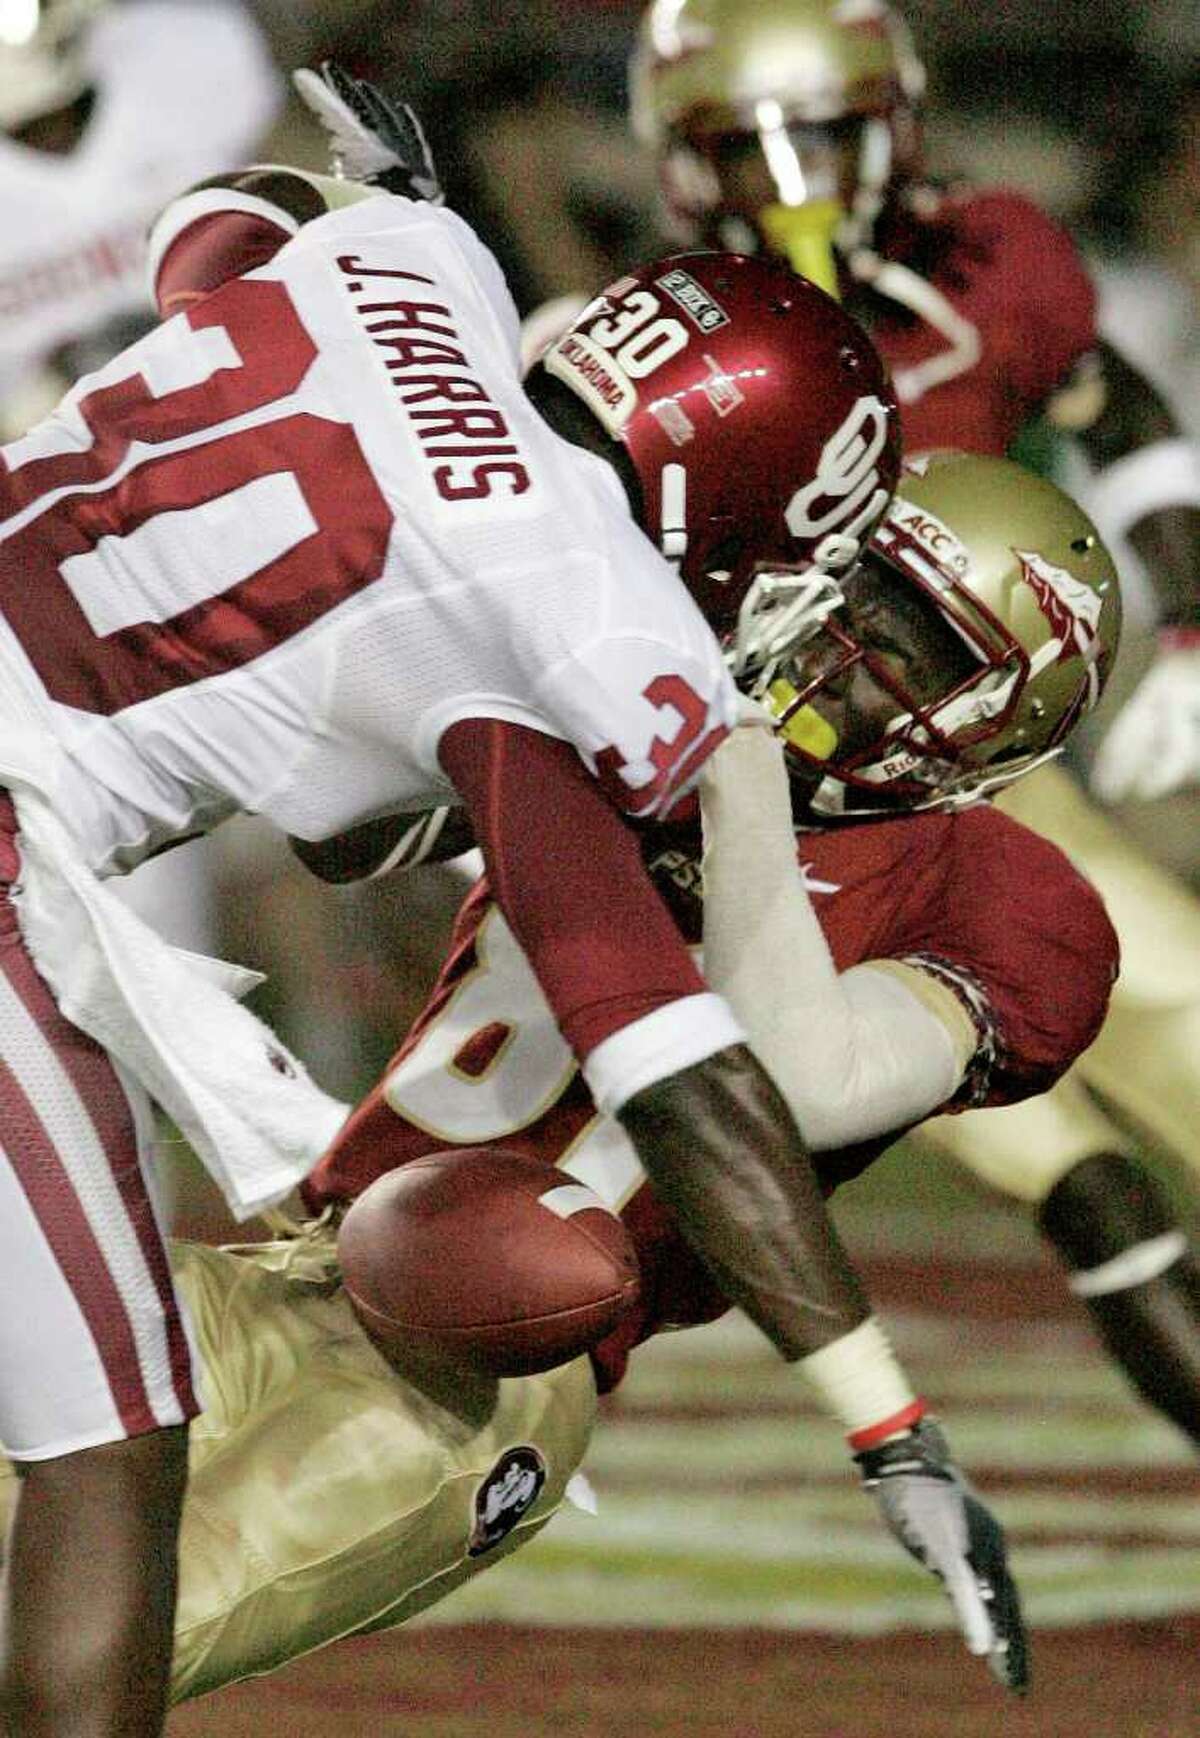 STEVE CANNON: ASSOCIATED PRESS VICIOUS: Florida State receiver Kenny Shaw loses the ball as he gets hit by a pair of Oklahoma players, including Javon Harris (30), during the second quarter Saturday. Shaw was taken to a hospital by ambulance but was able to give the crowd a thumbs-up with his left hand before departing.